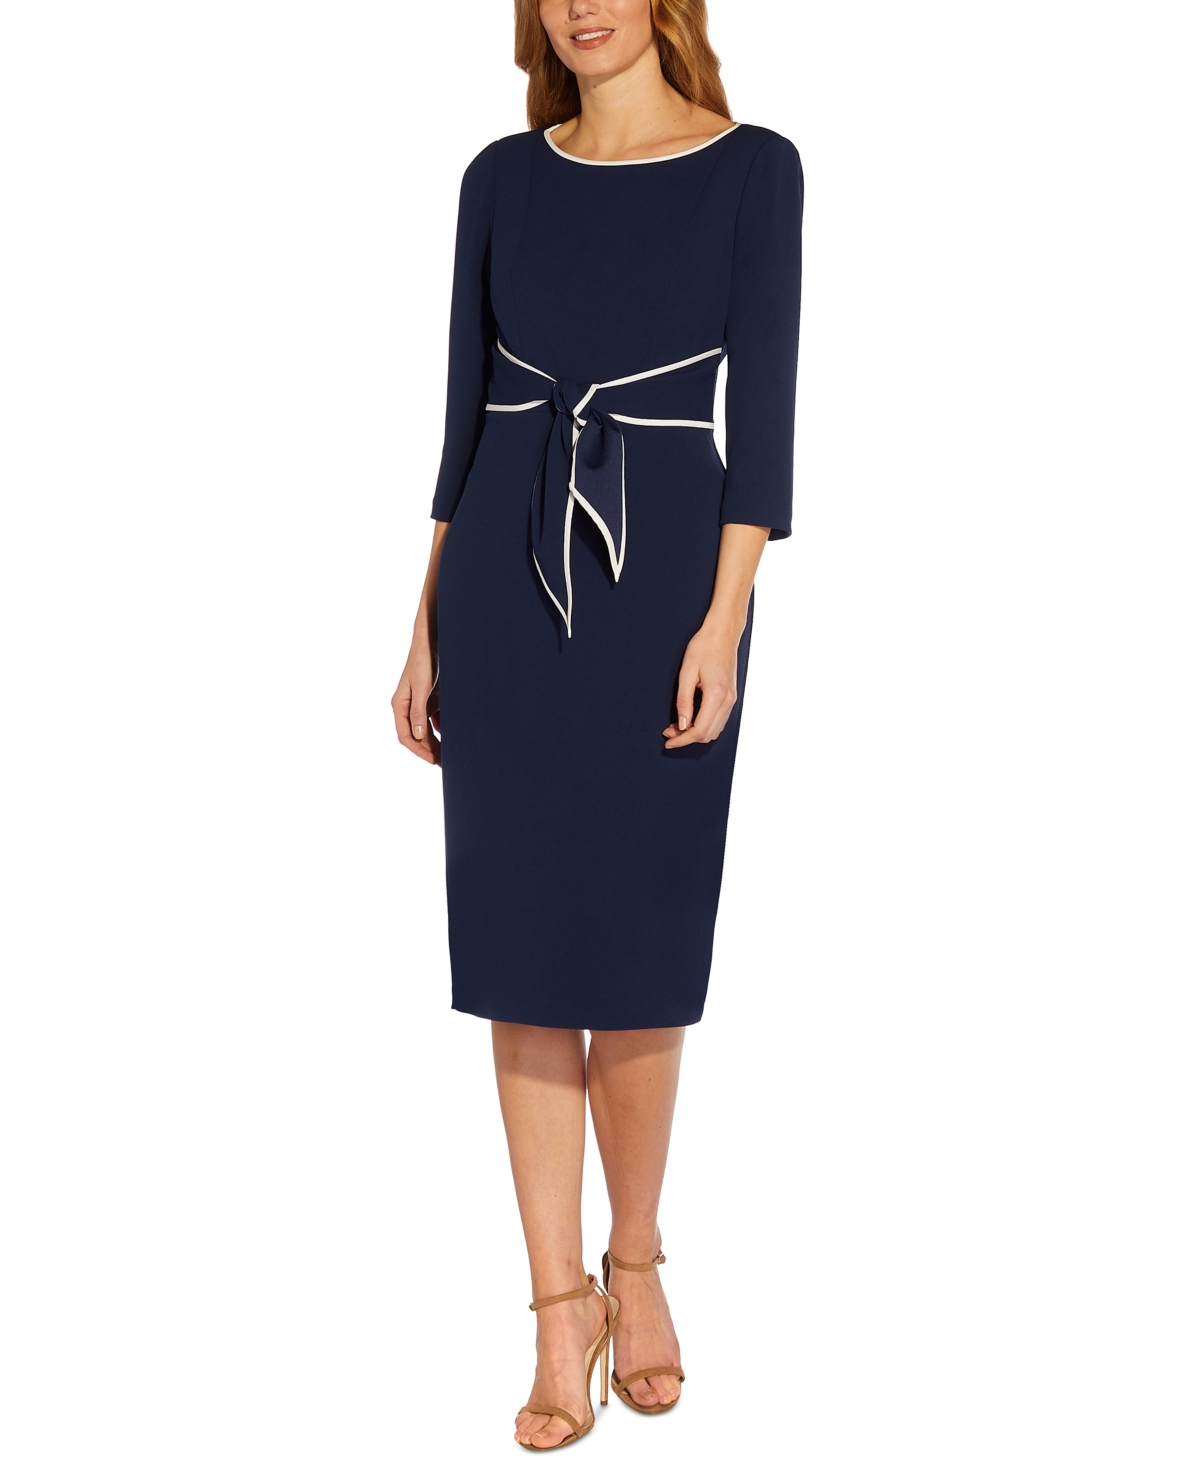 Women's Tipped Tie-Front 3/4-Sleeve Dress - Navy Sateen/Ivory